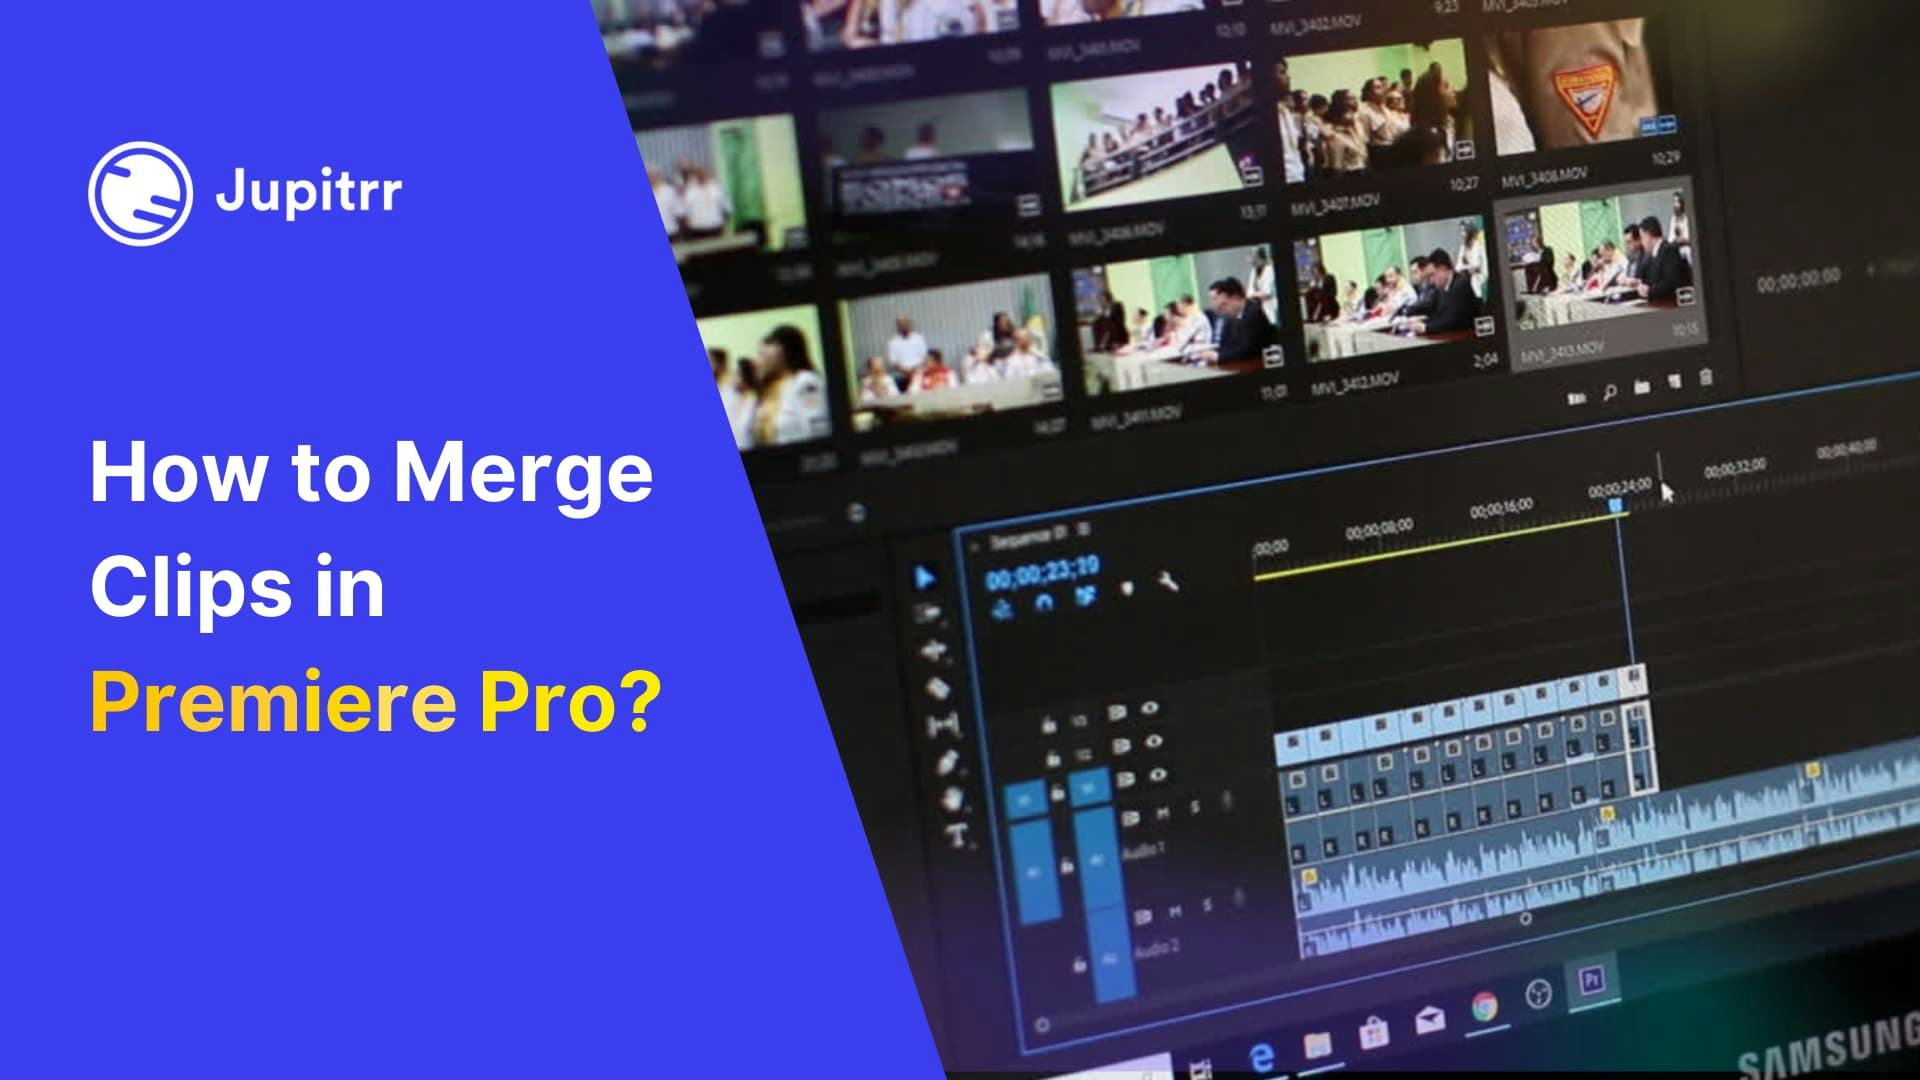 How to Merge Clips in Premiere Pro?